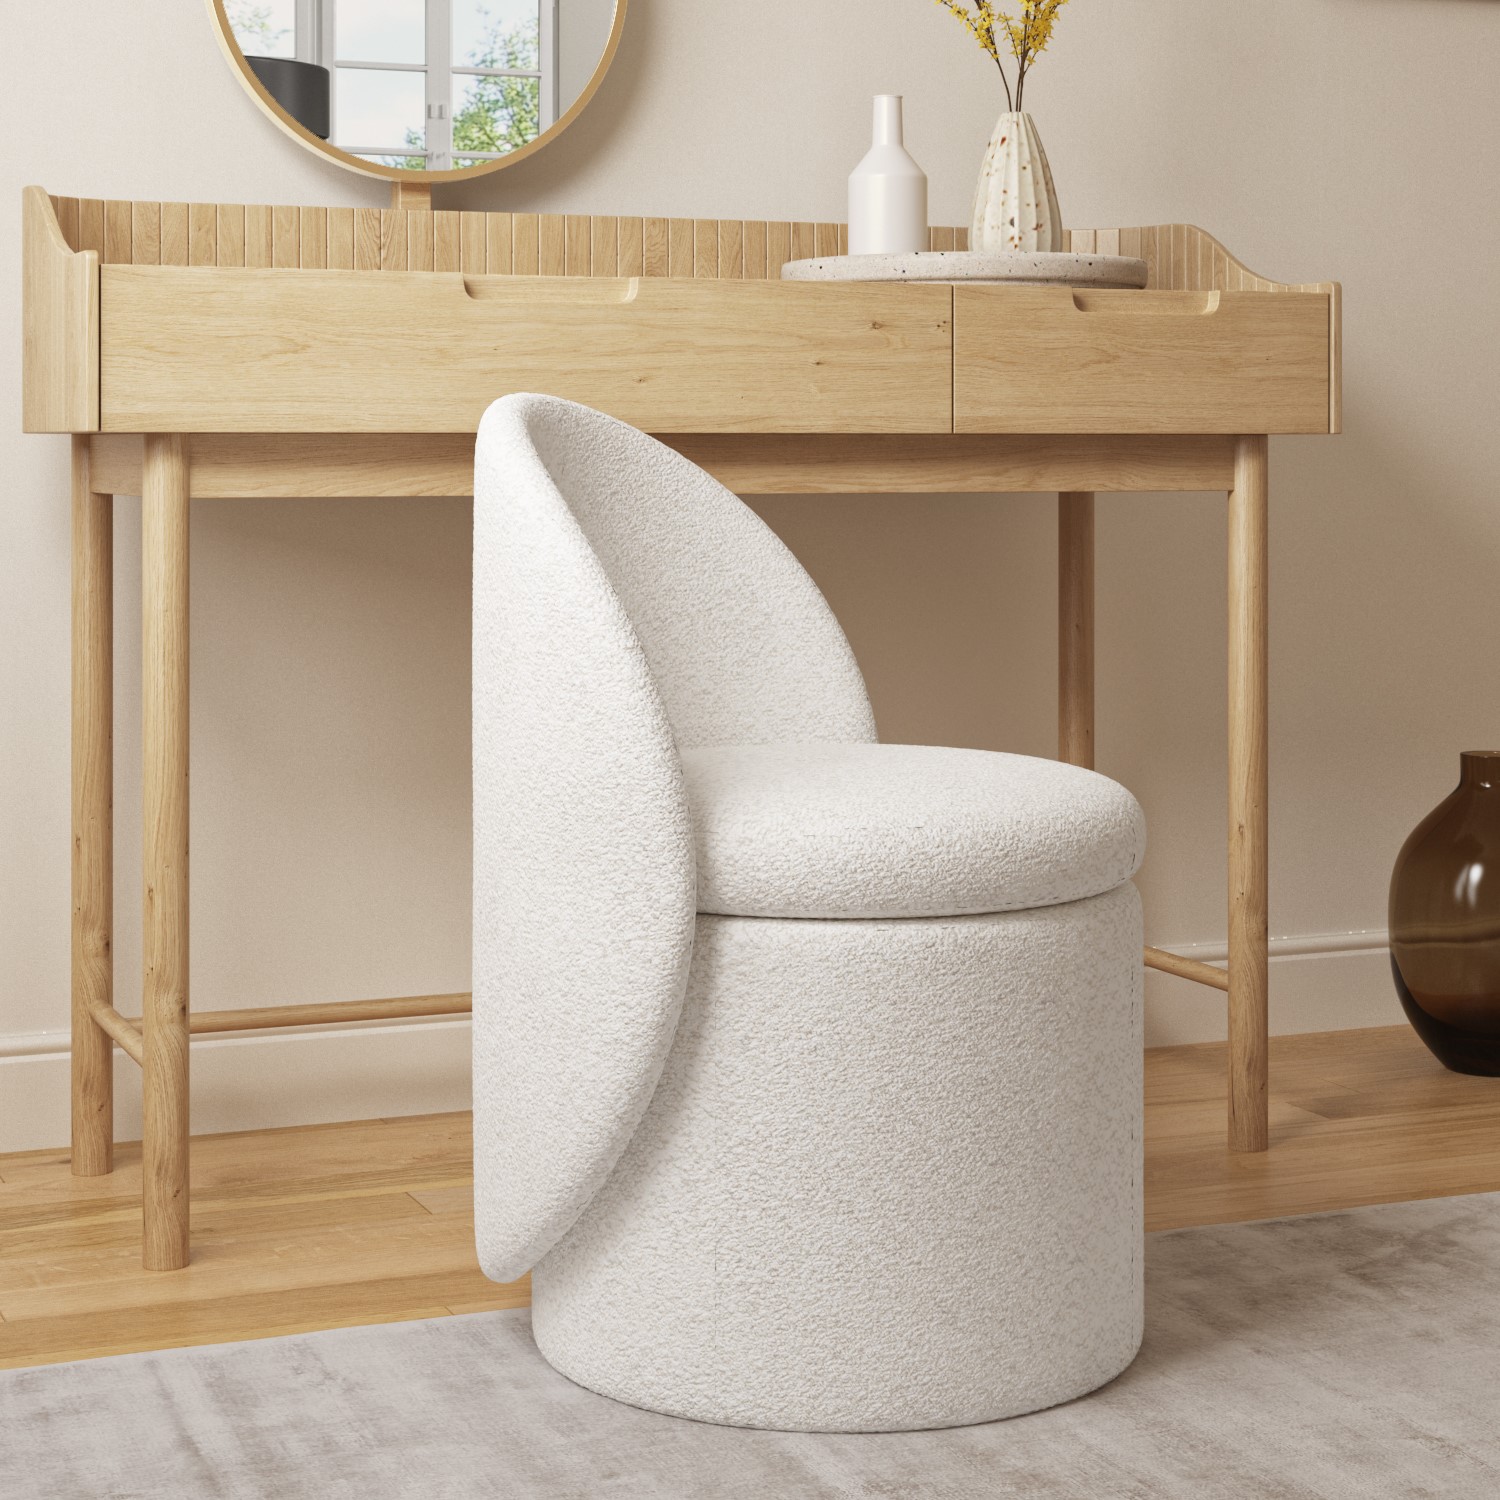 Read more about Off-white boucle dressing table chair with ottoman storage leah